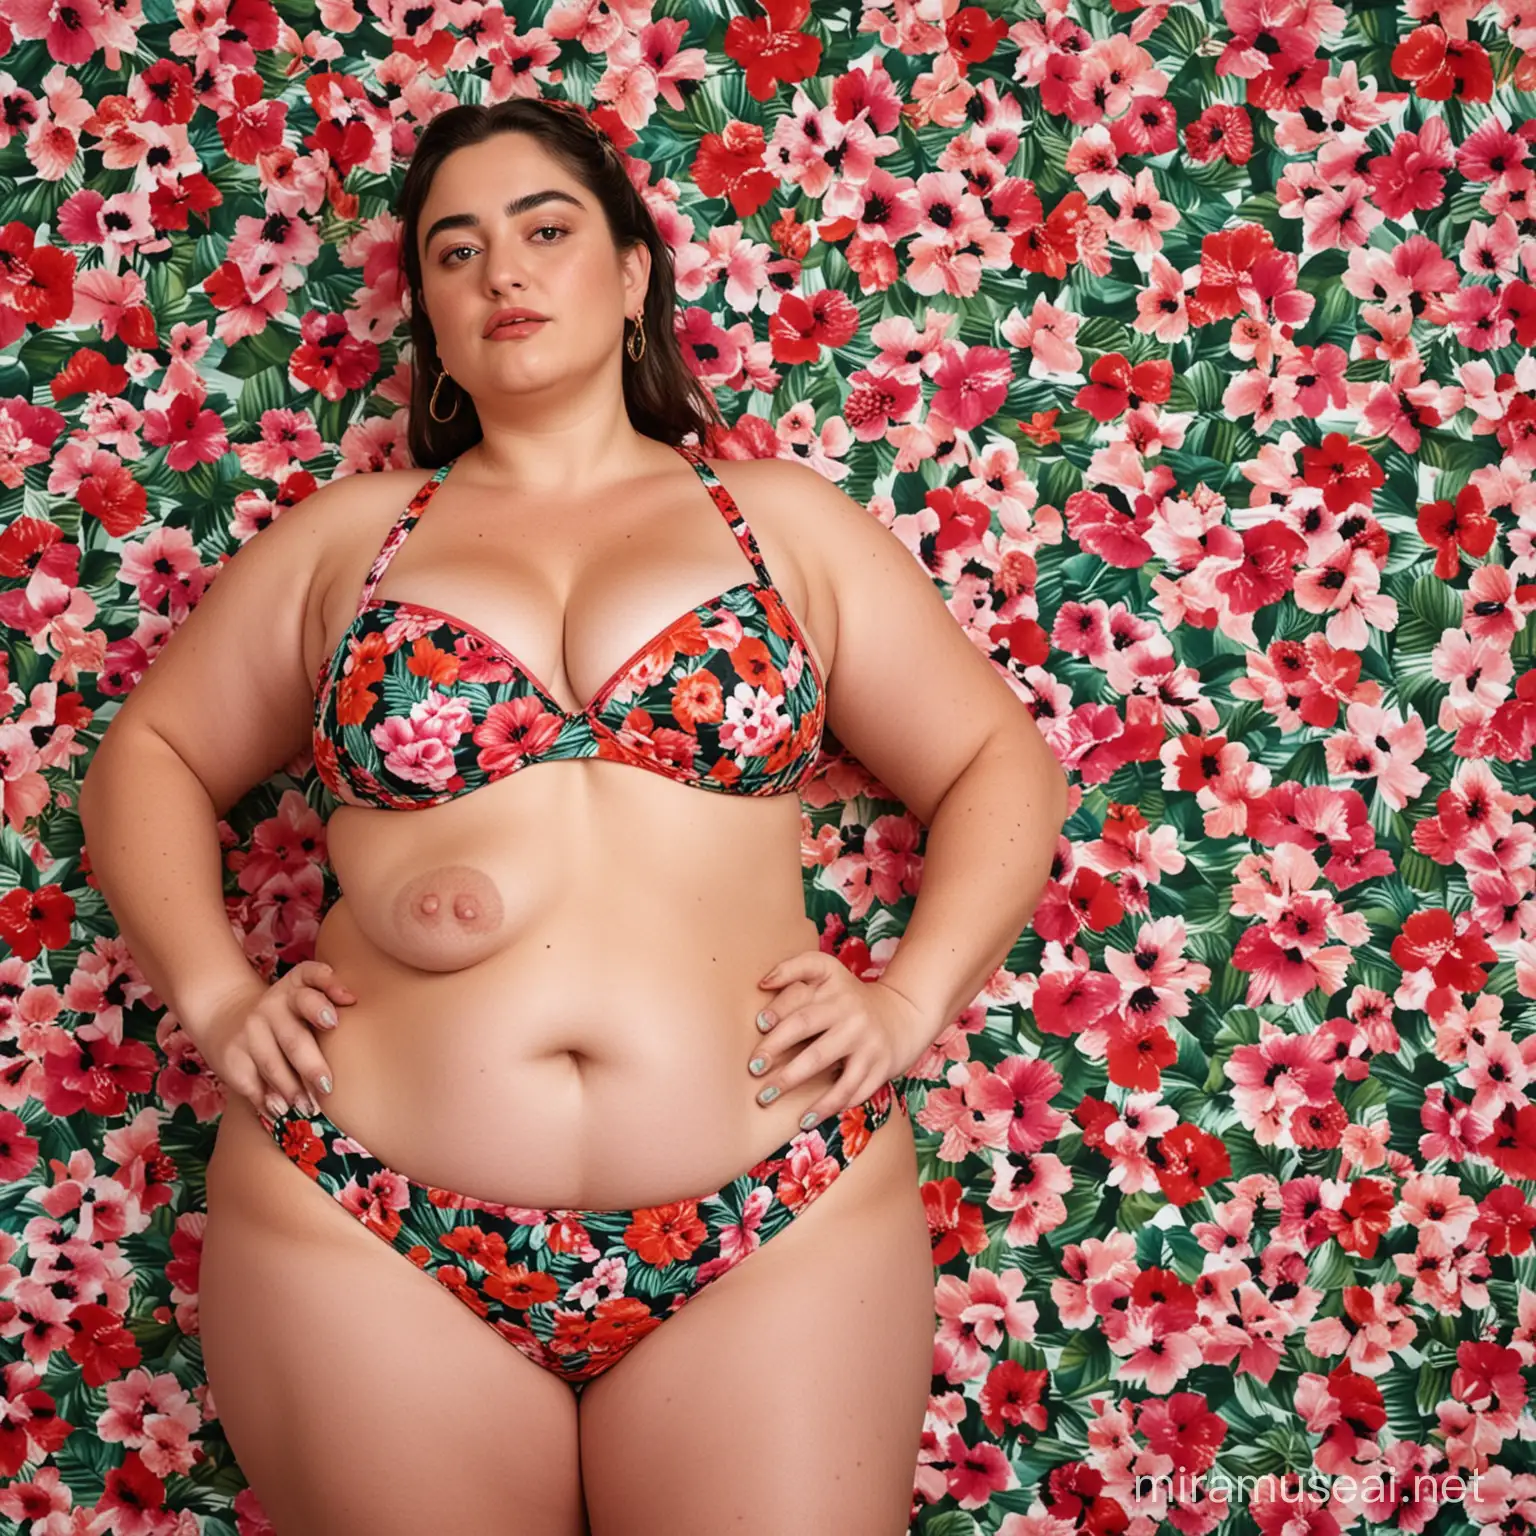 Steve Macintosh  depicting chubby Frida coelho in a bikini posing for a picture, bloated, young woman in her 20s, charli bowater, looking from side and bottom!, photograph taken in 2 0 2 0, perfect human female specimen, probably in her 30s, floral patterned skin, curves!!